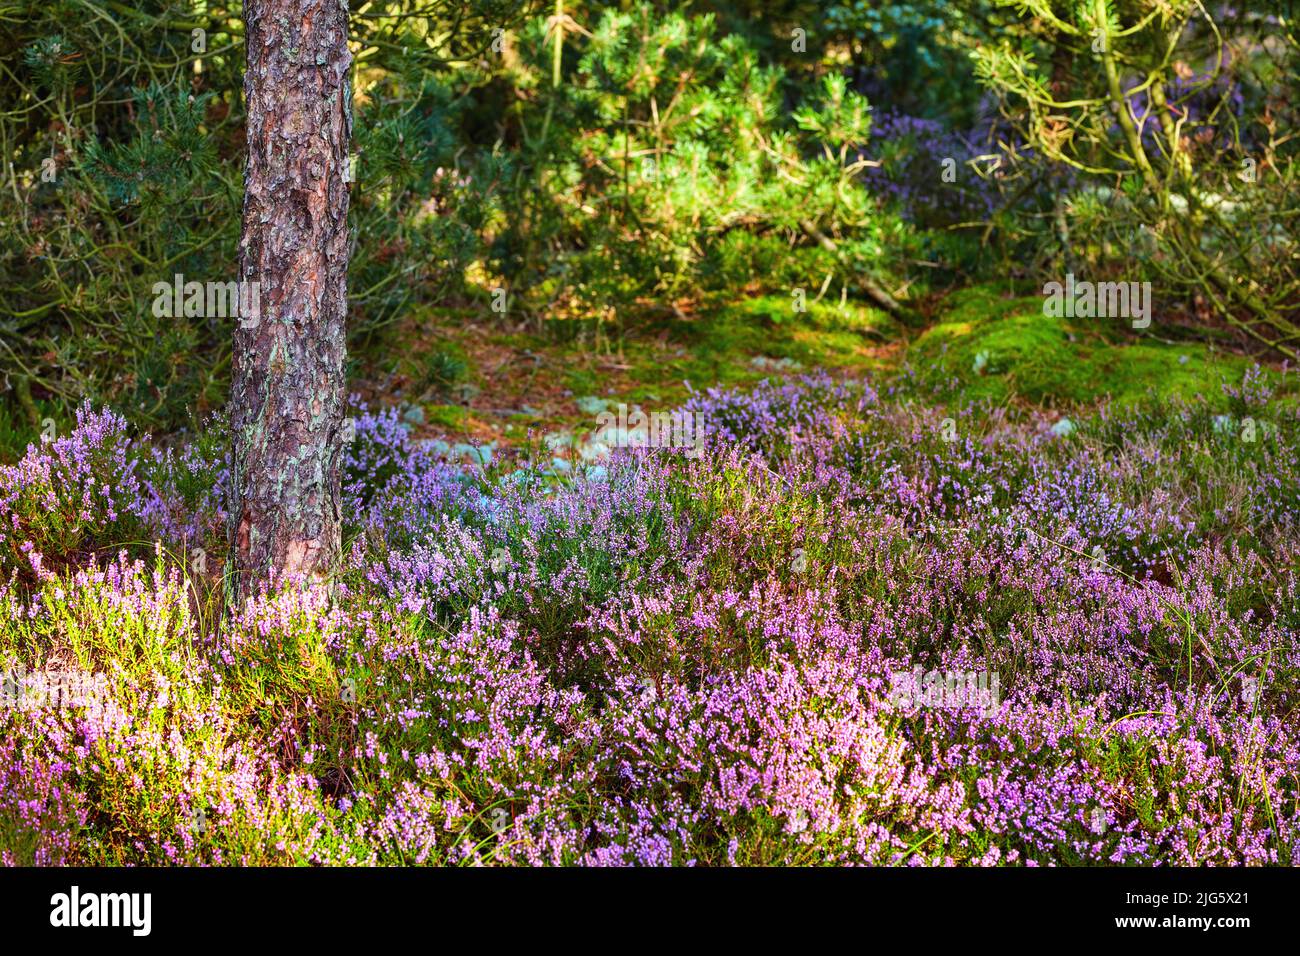 Colorful forest meadow with purple flowers and pine trees in rural countryside. Lush green field with various flowering bushes. Overgrown wild shrubs Stock Photo